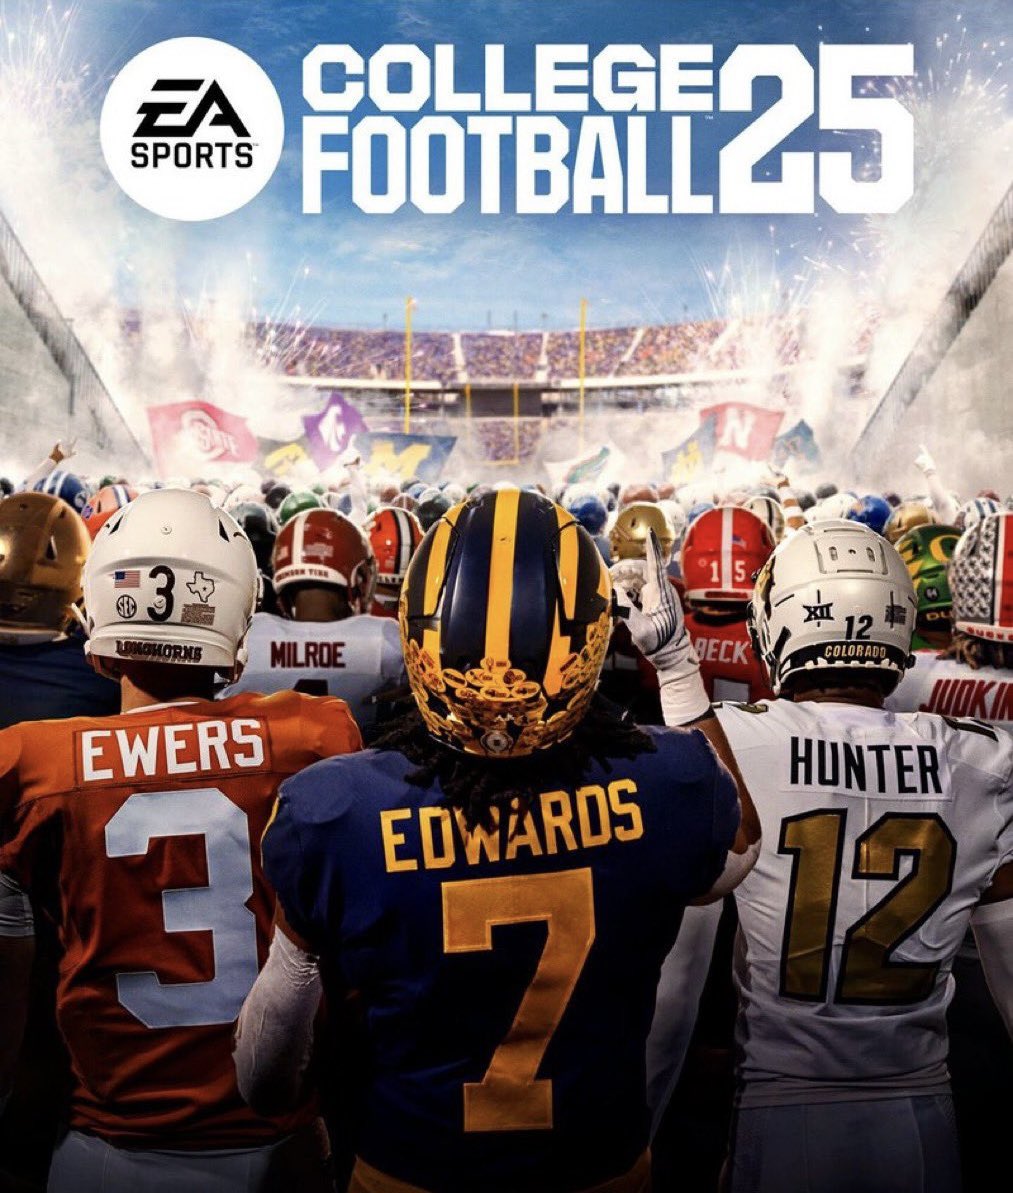 freddie got robbed of the NCAA 25 cover he deserved